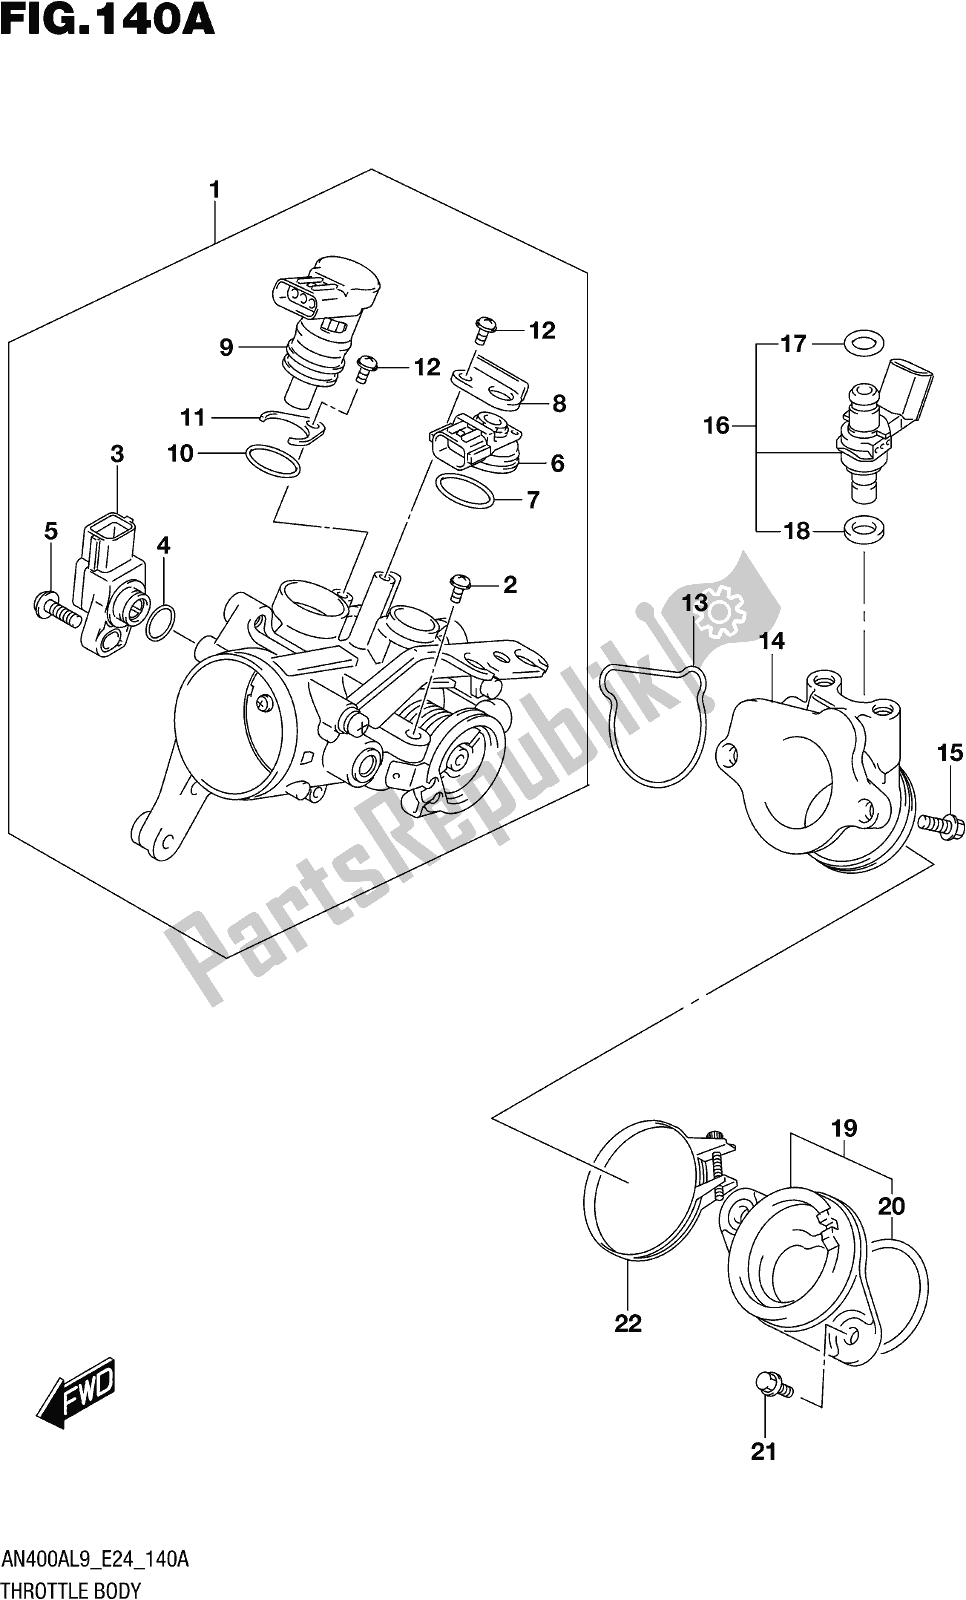 All parts for the Fig. 140a Throttle Body of the Suzuki Burgman AN 400A 2019